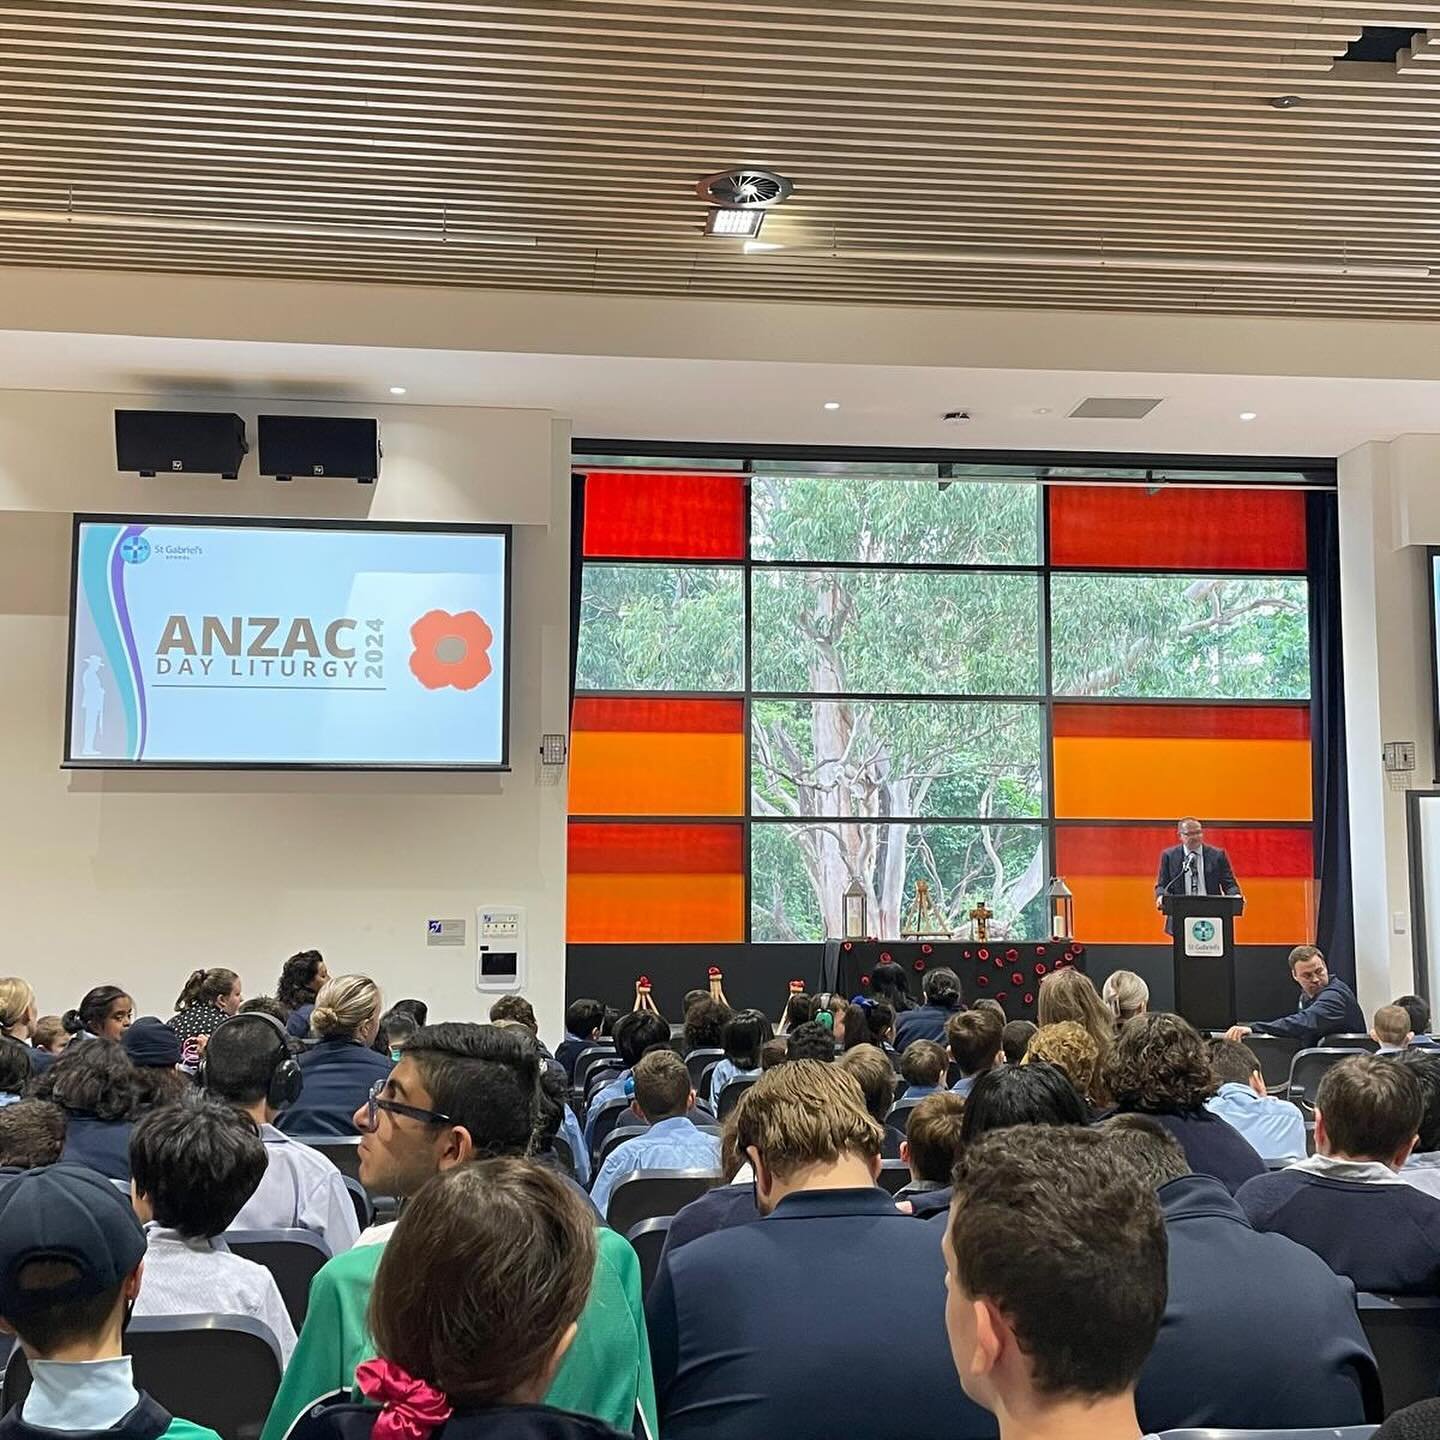 After a couple of days settling back into Term 2, today we celebrated our ANZAC Liturgy. Students paid their respects to those who have fought for our country and prayed for the peaceful end to conflict around the world. Thank you to our Year 11 and 